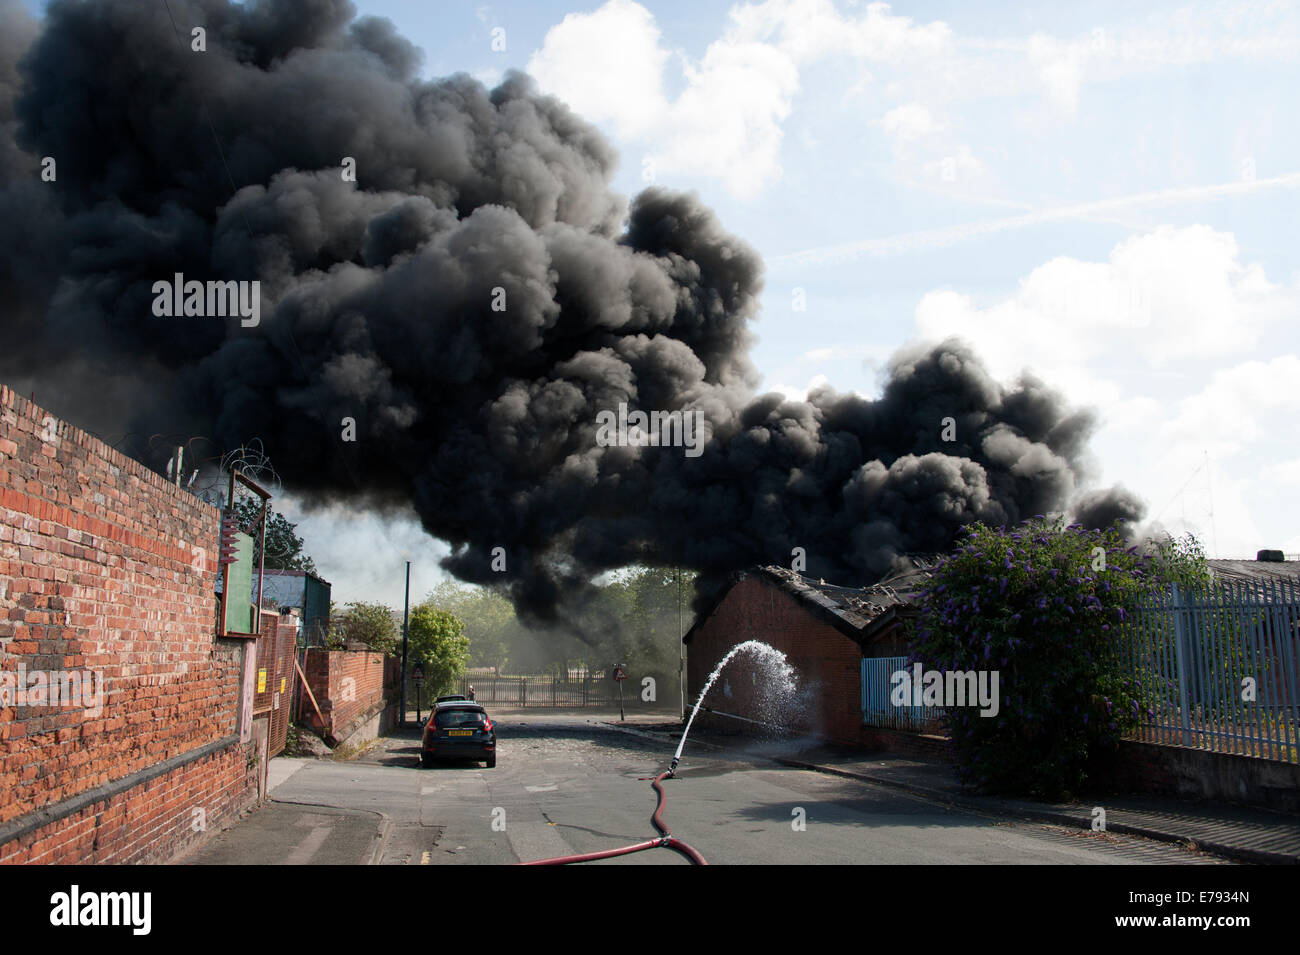 Thick Black Smoke Pollution Carbon Fire Hose Water Stock Photo